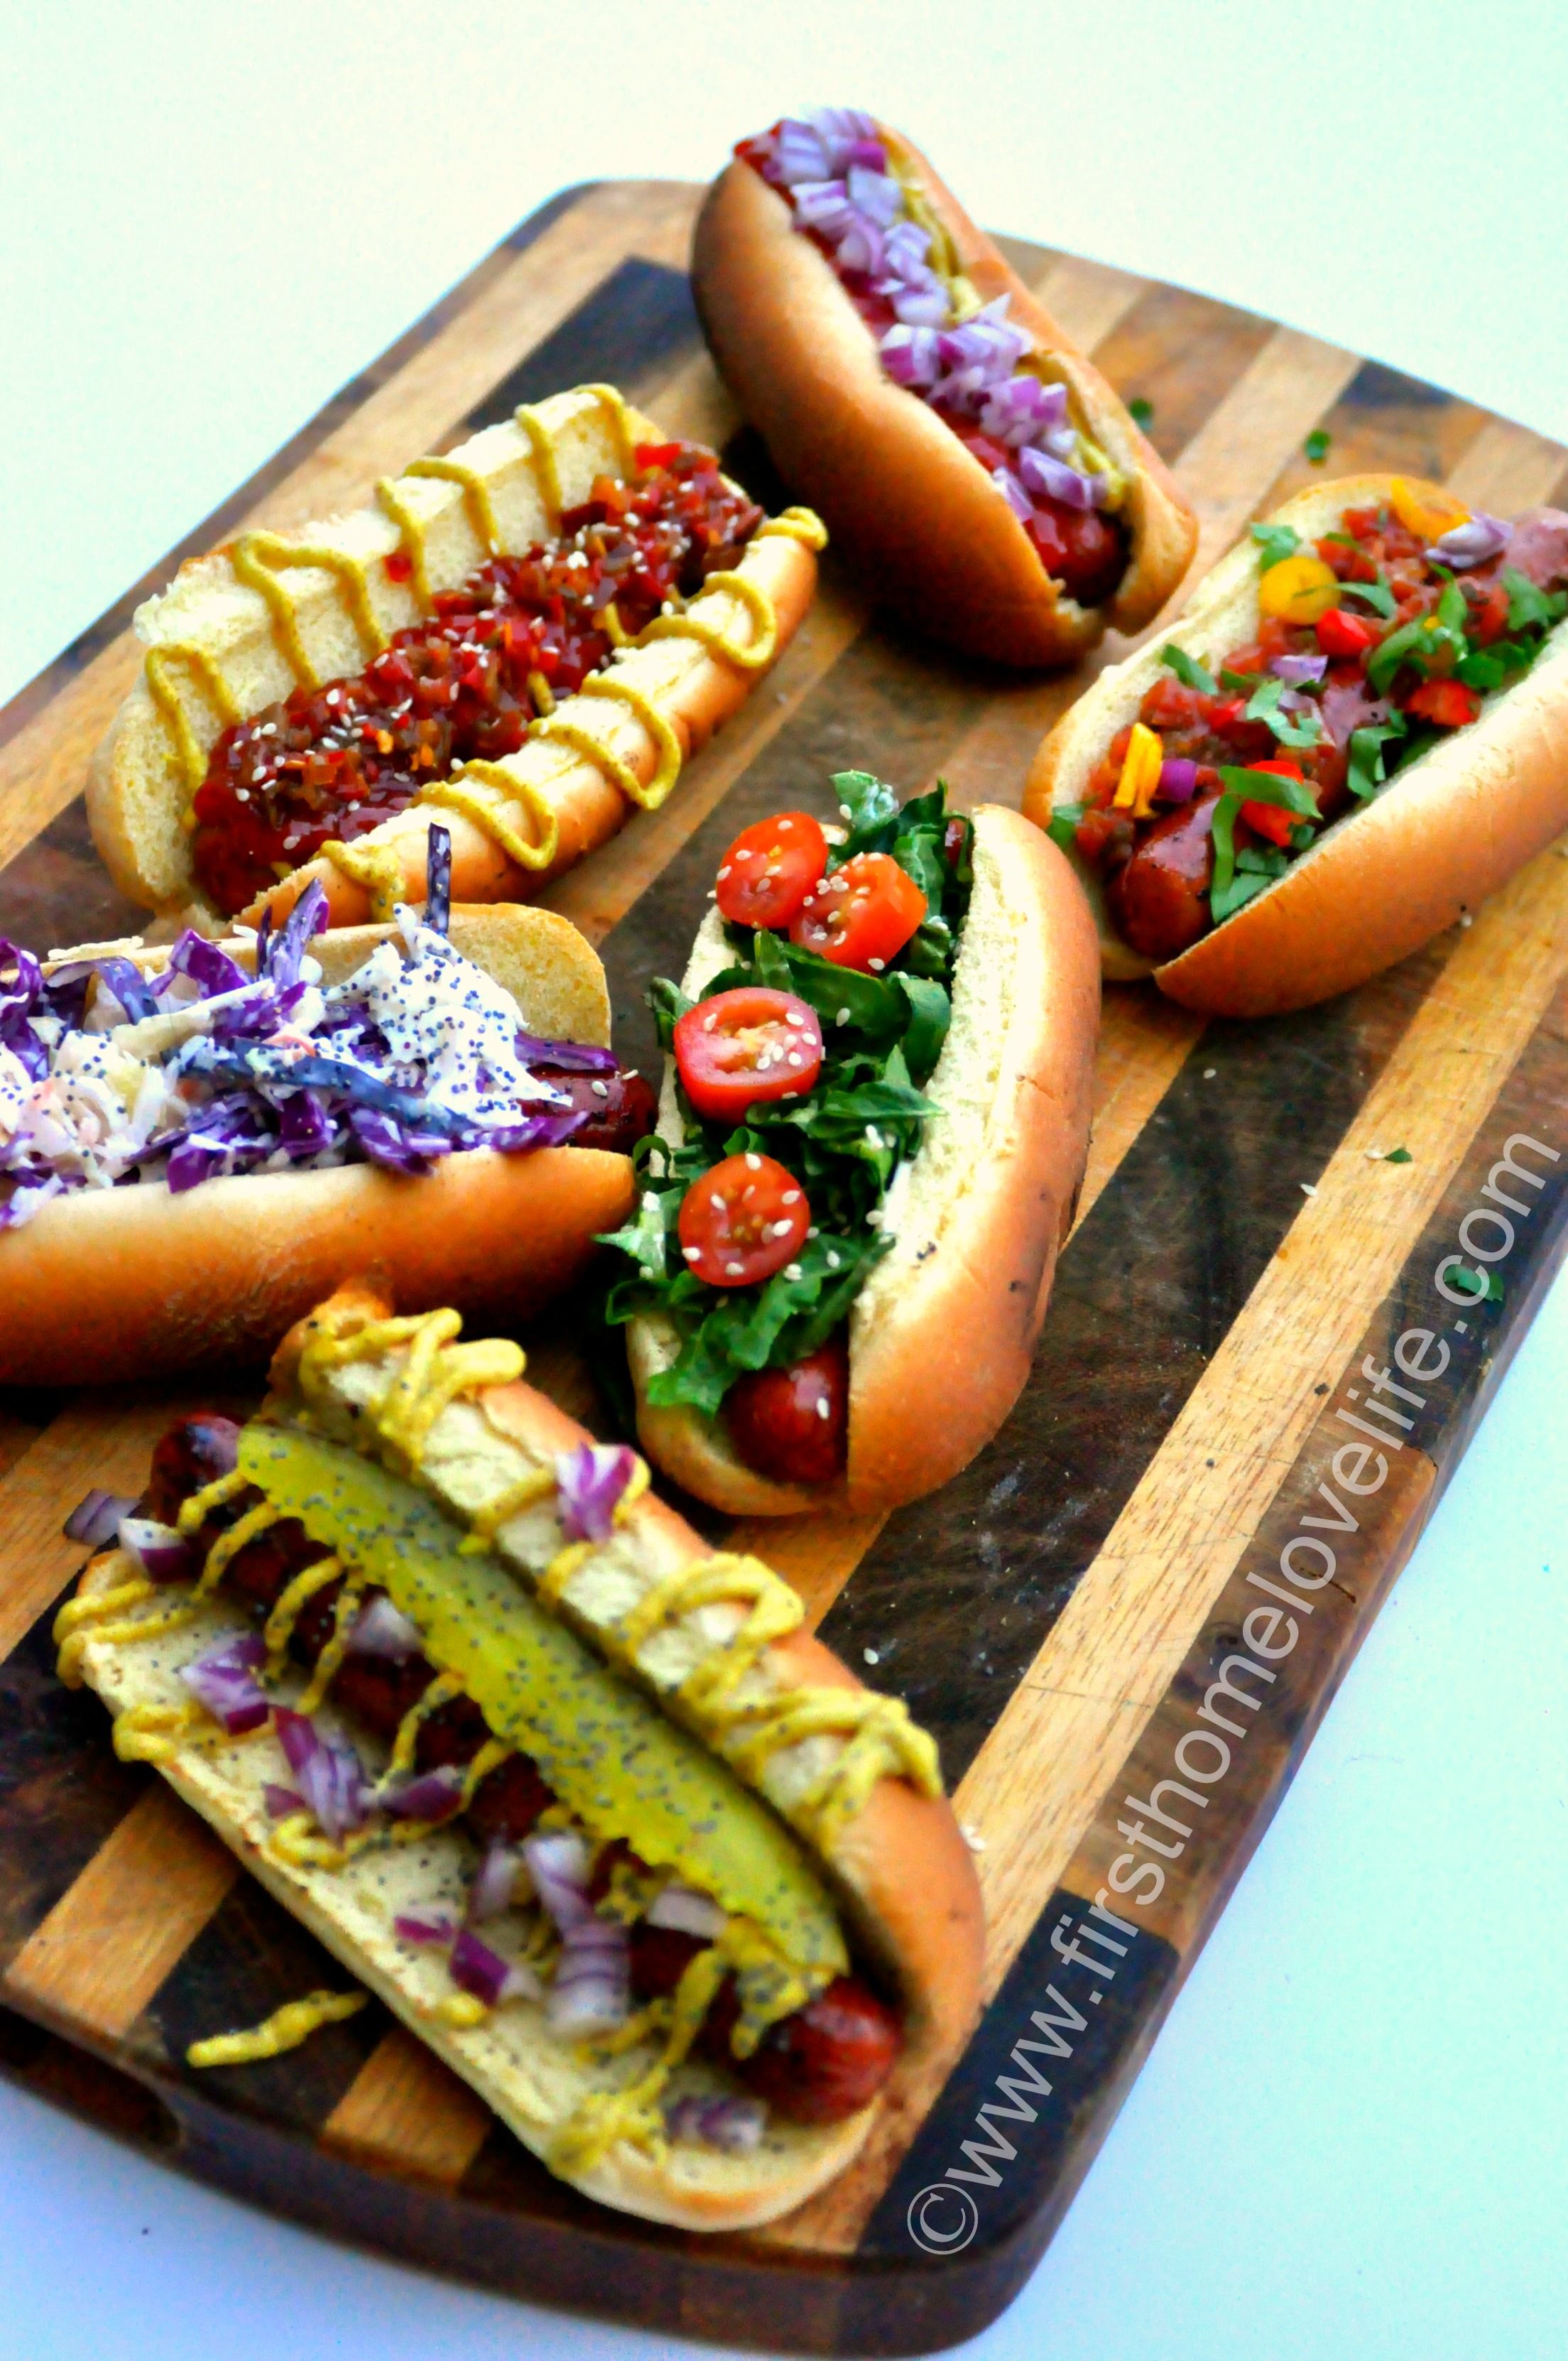 Must Try Hot Dog Toppings | Bar, Dog and Hot dog toppings